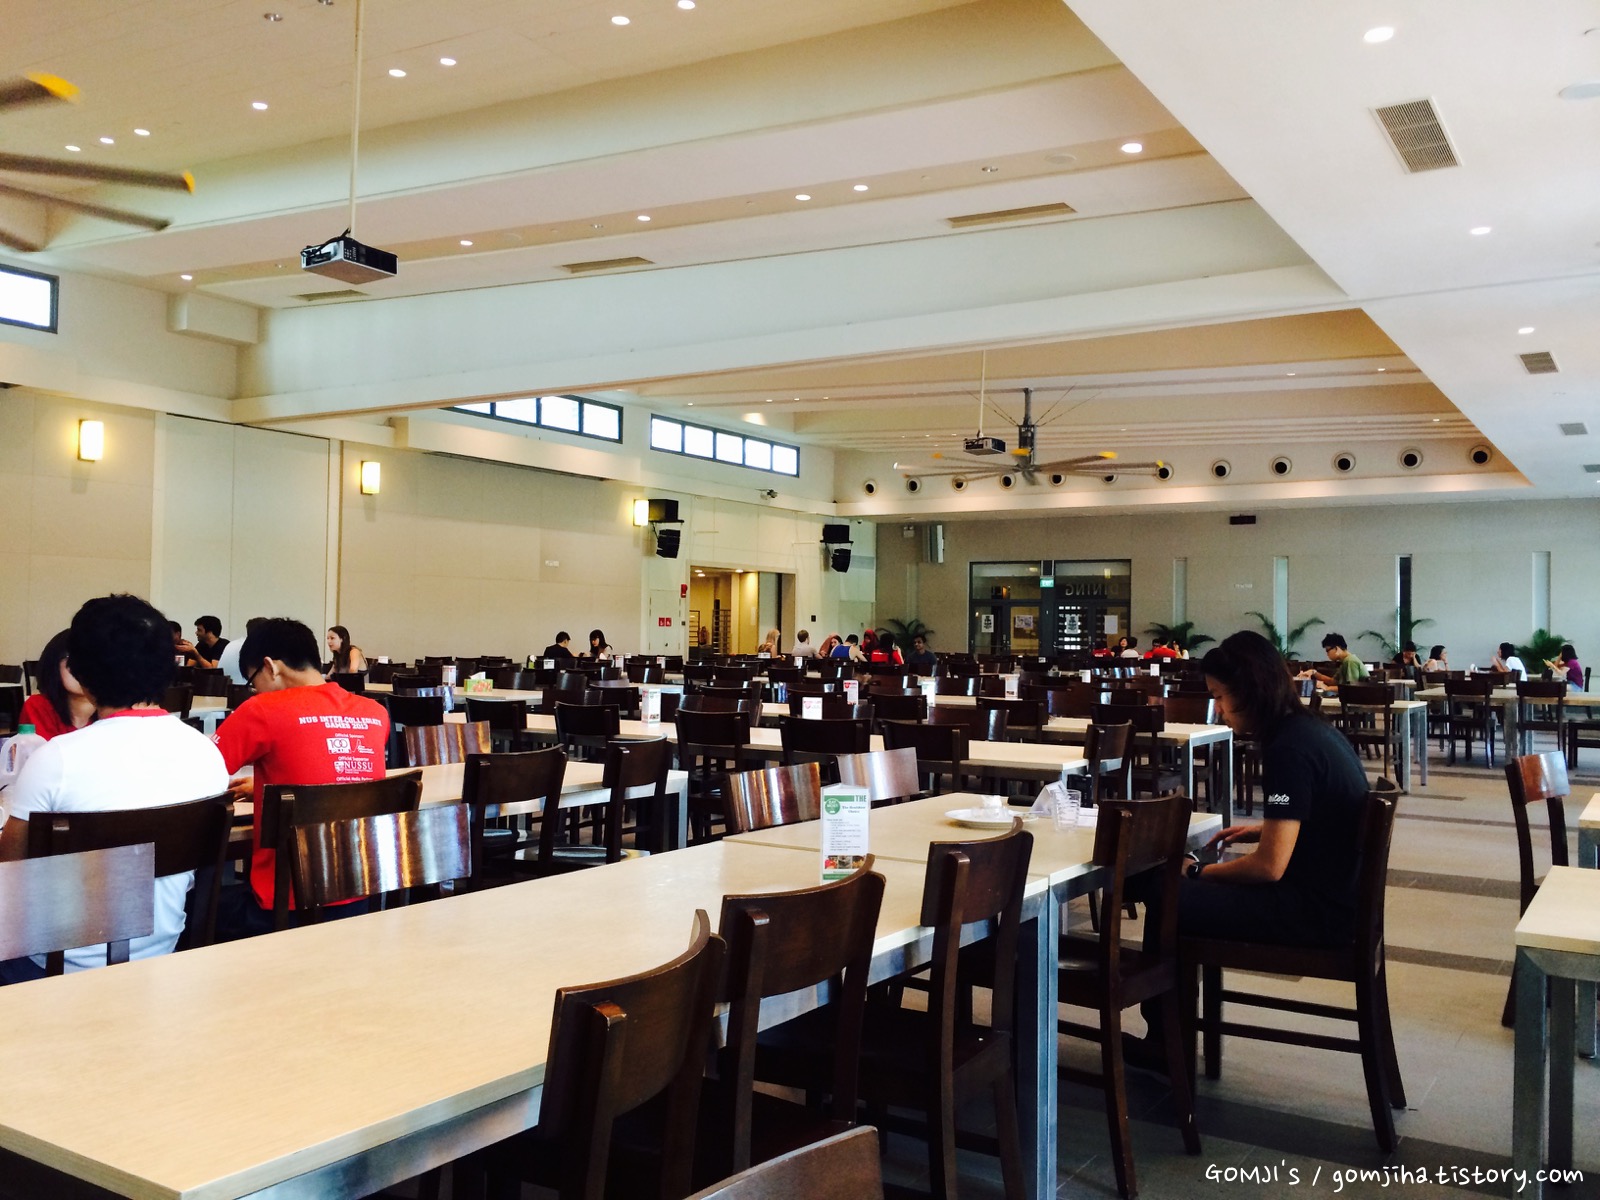 22 NUS students struck down with gastroenteritis, most ate Malay food at dining hall